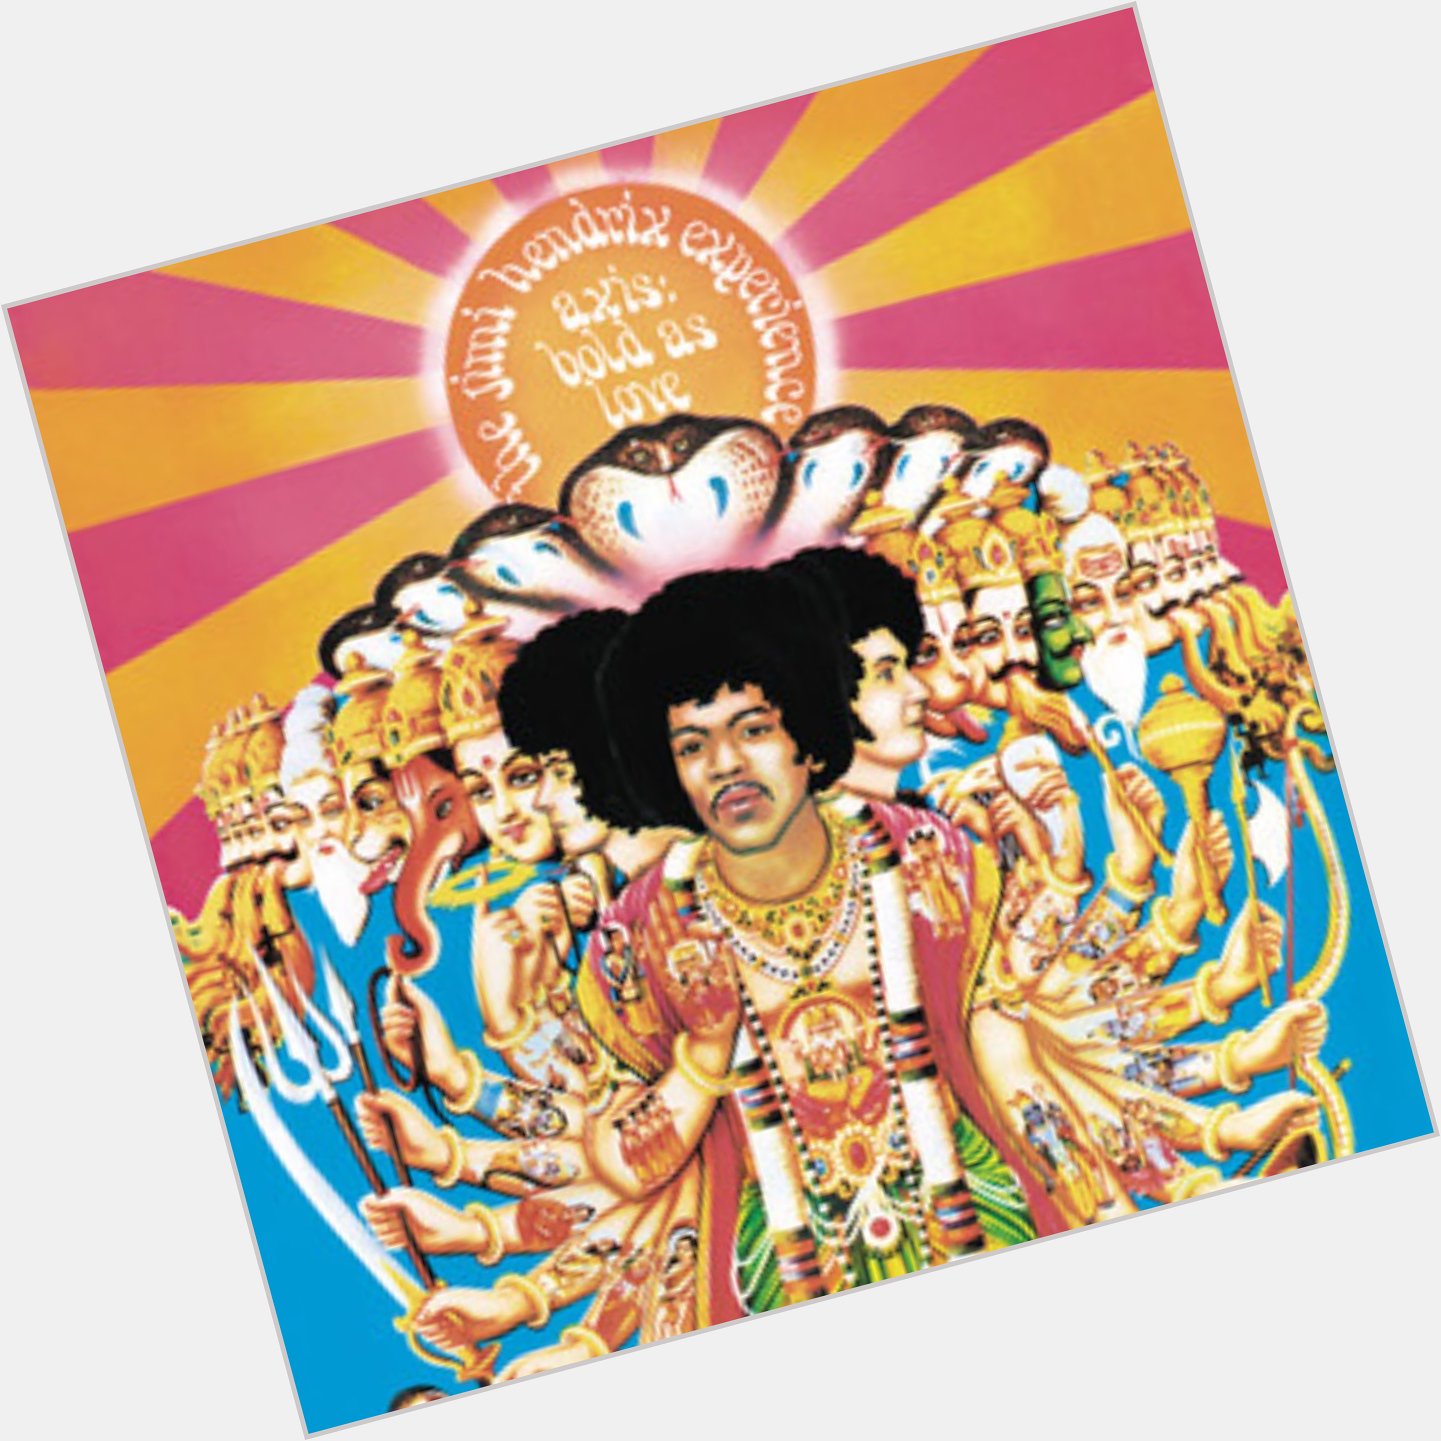 Happy 50th birthday to axis bold as love. One of Jimi Hendrix amazing albums. 